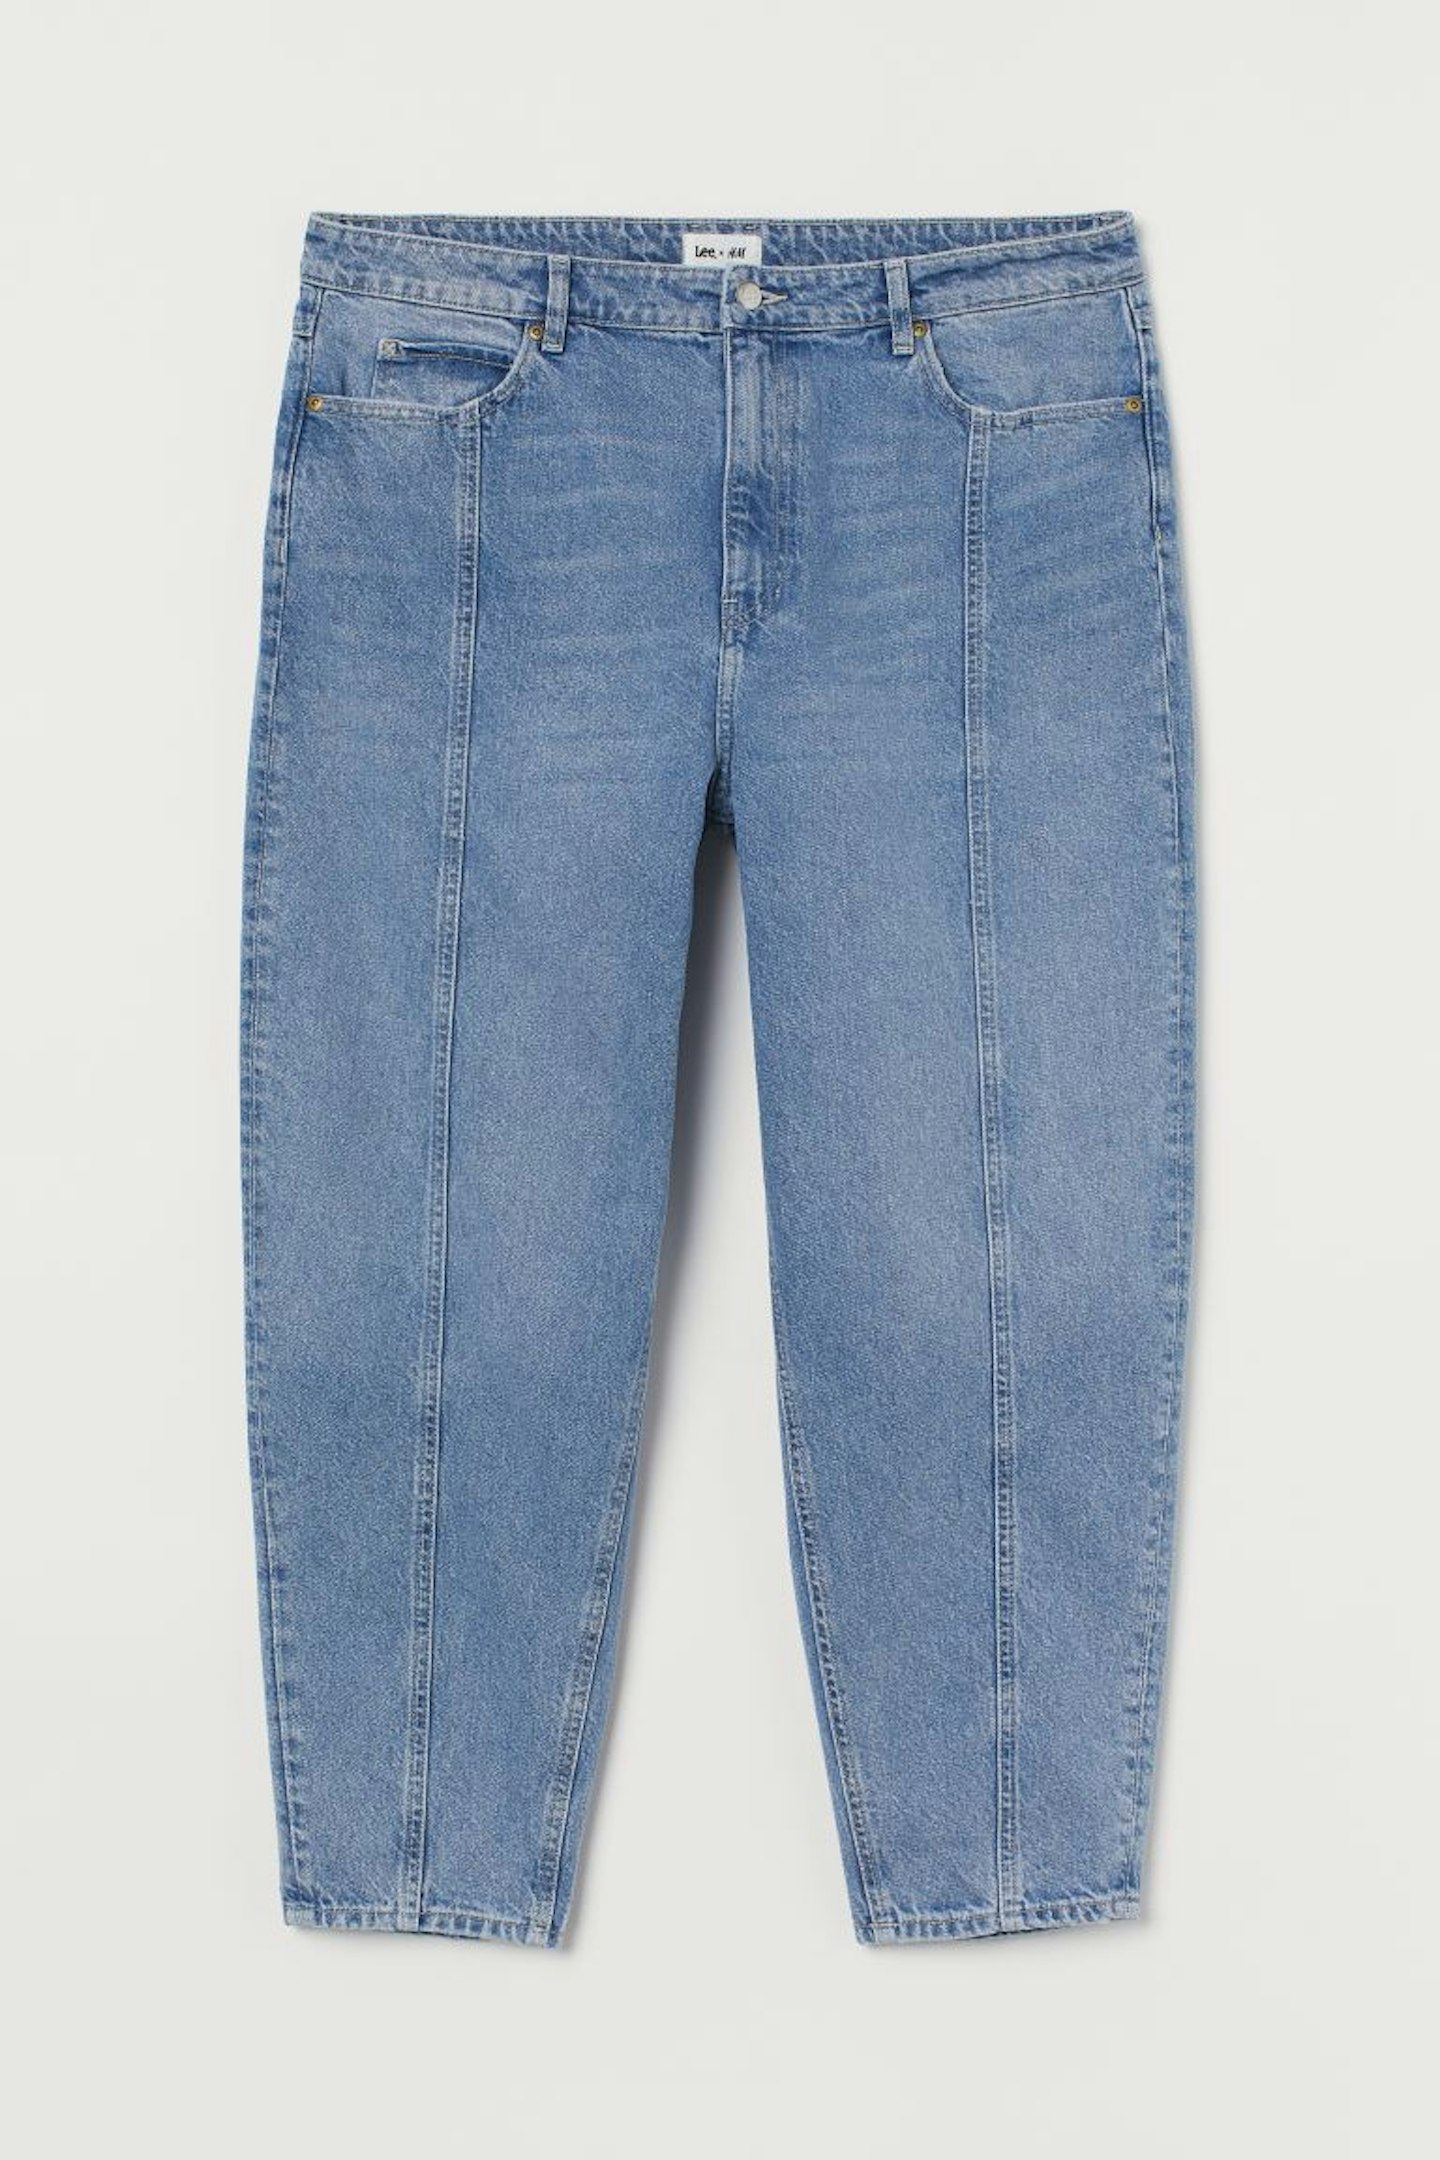 The New Lee Jeans X H&M Collection Is 100% Sustainable – Grazia